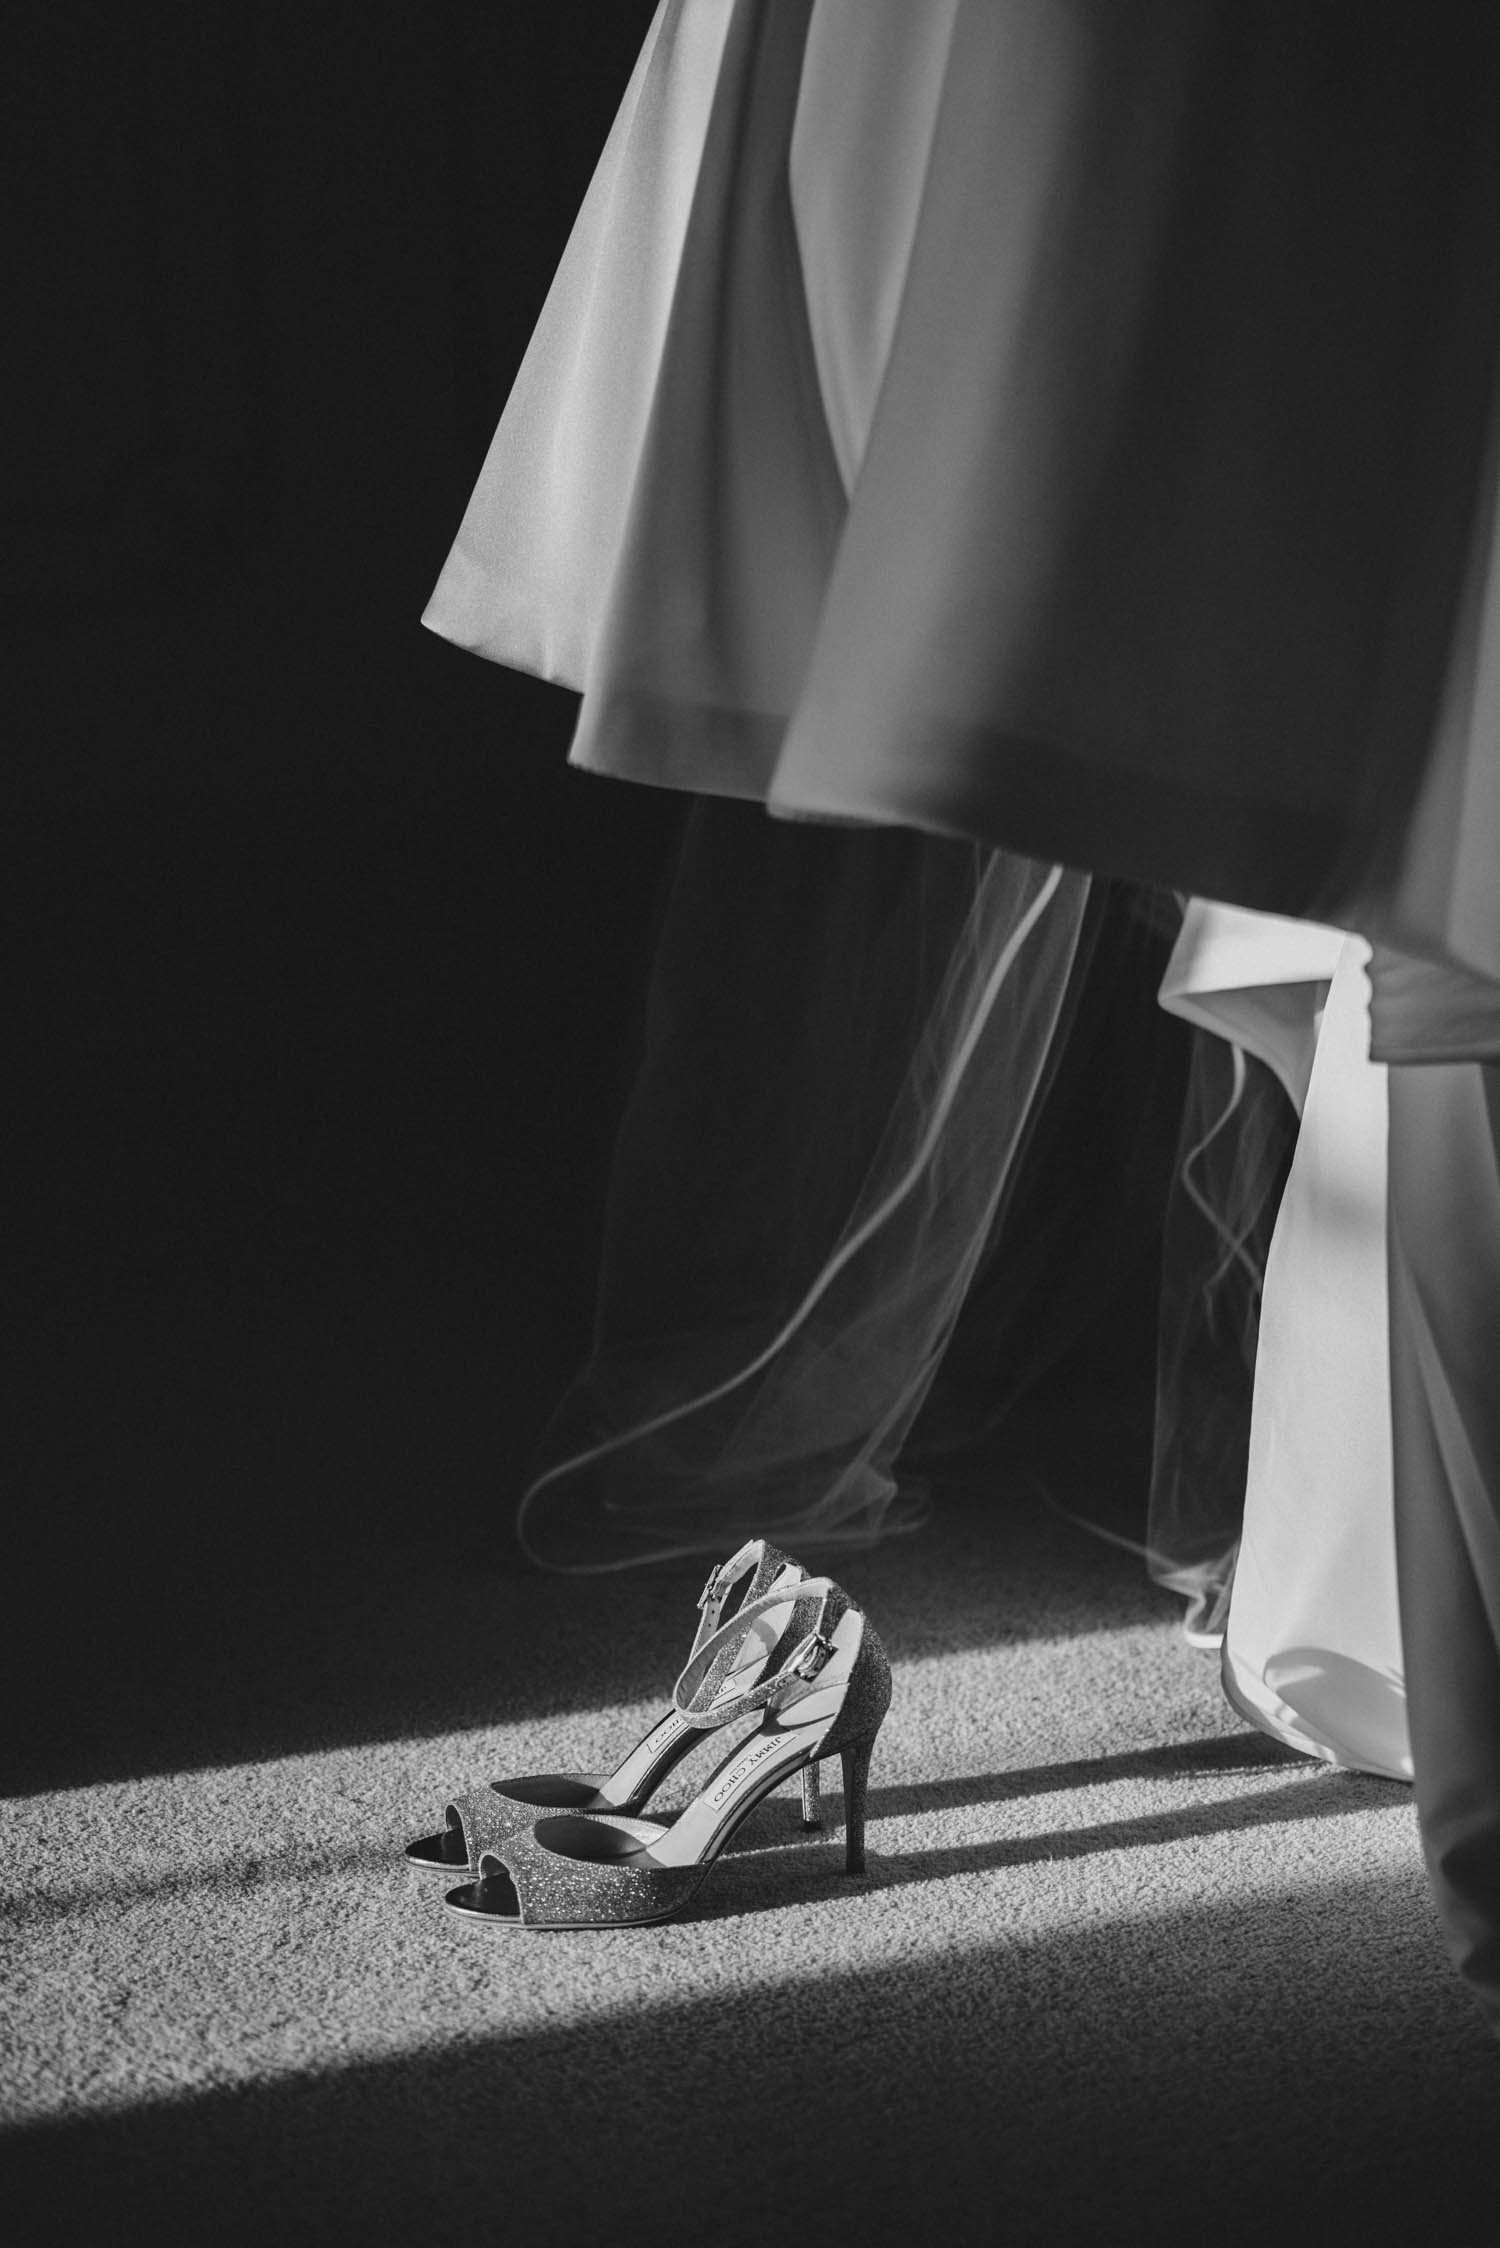 Jimmy Choo wedding shoes in black and white with streaking sunlight